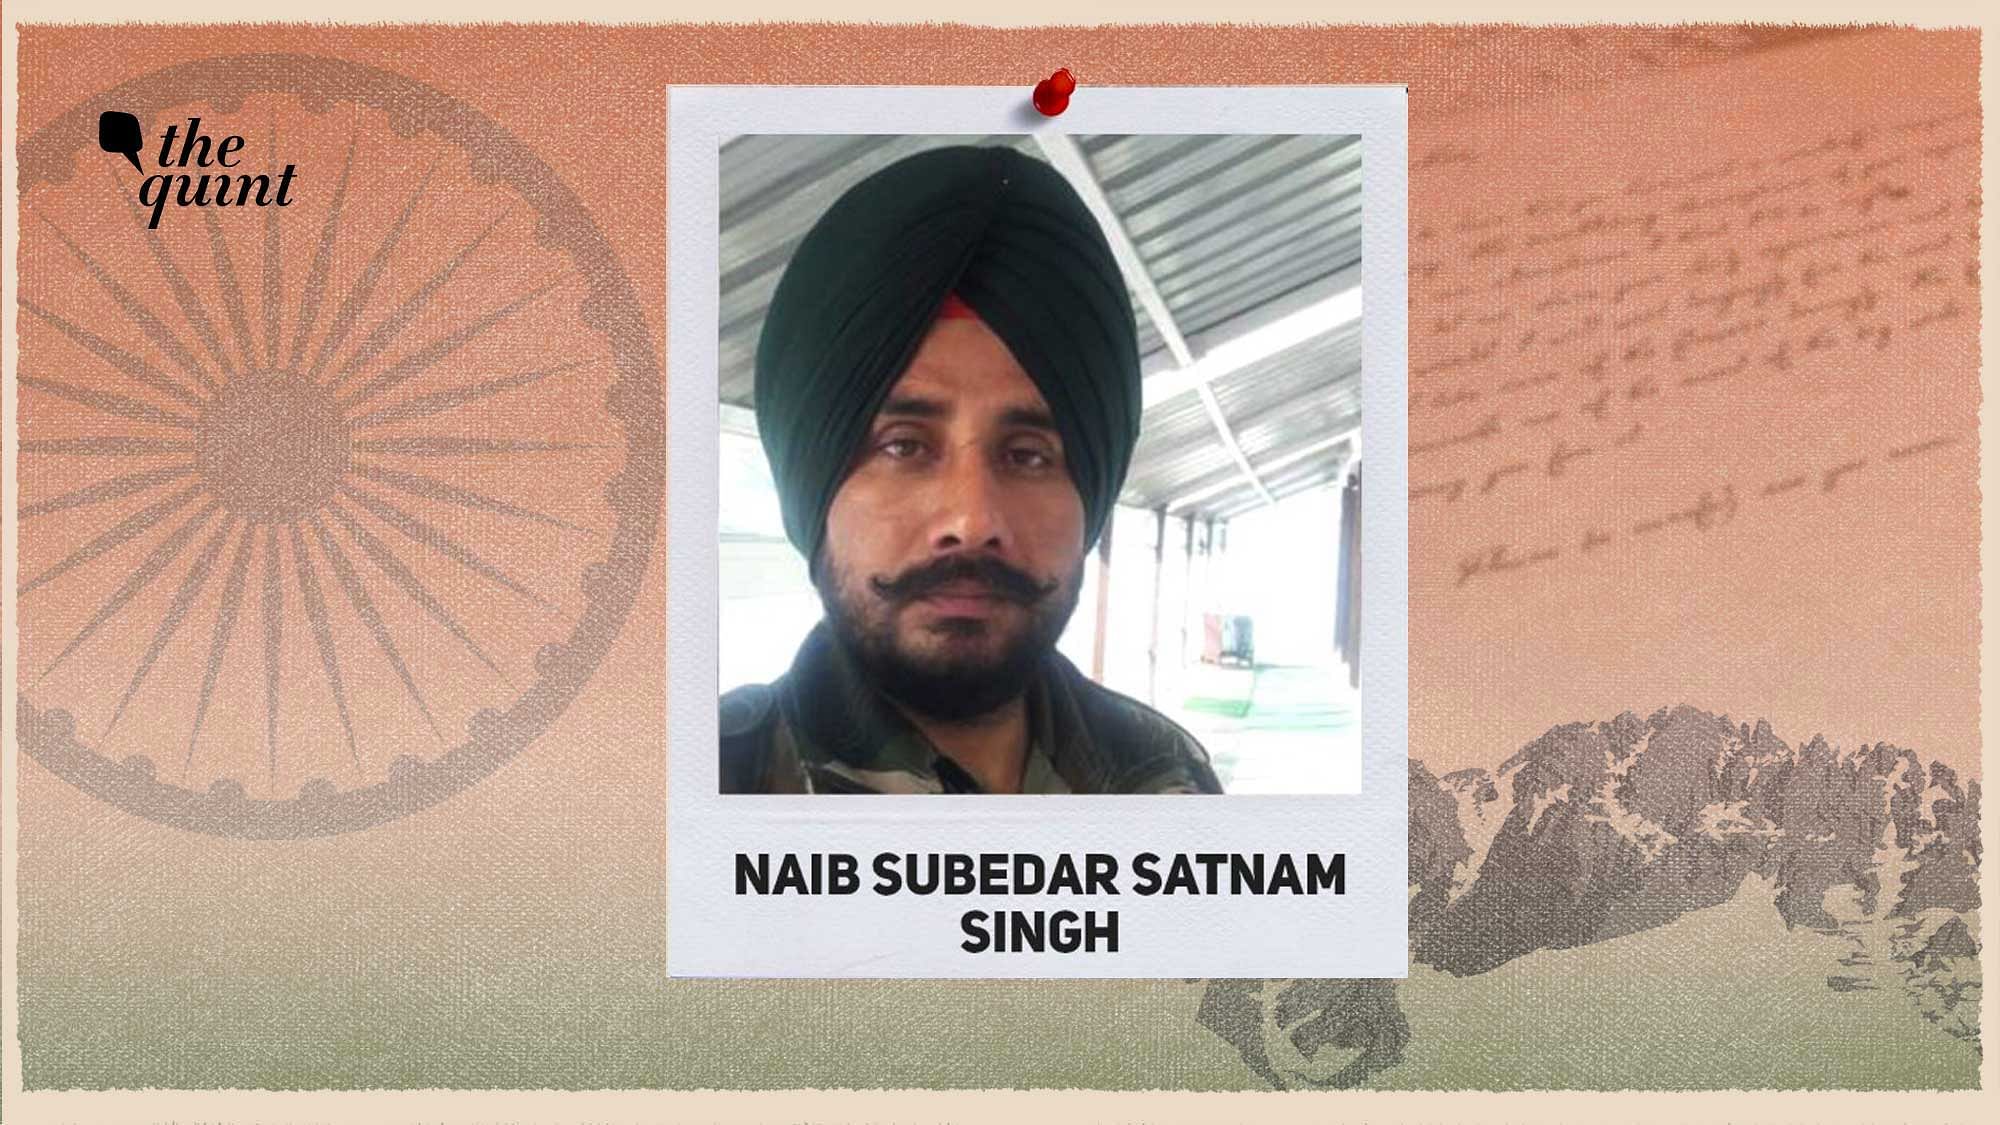 Having served in the Army for 25 years, duty always came first for martyr Satnam Singh.